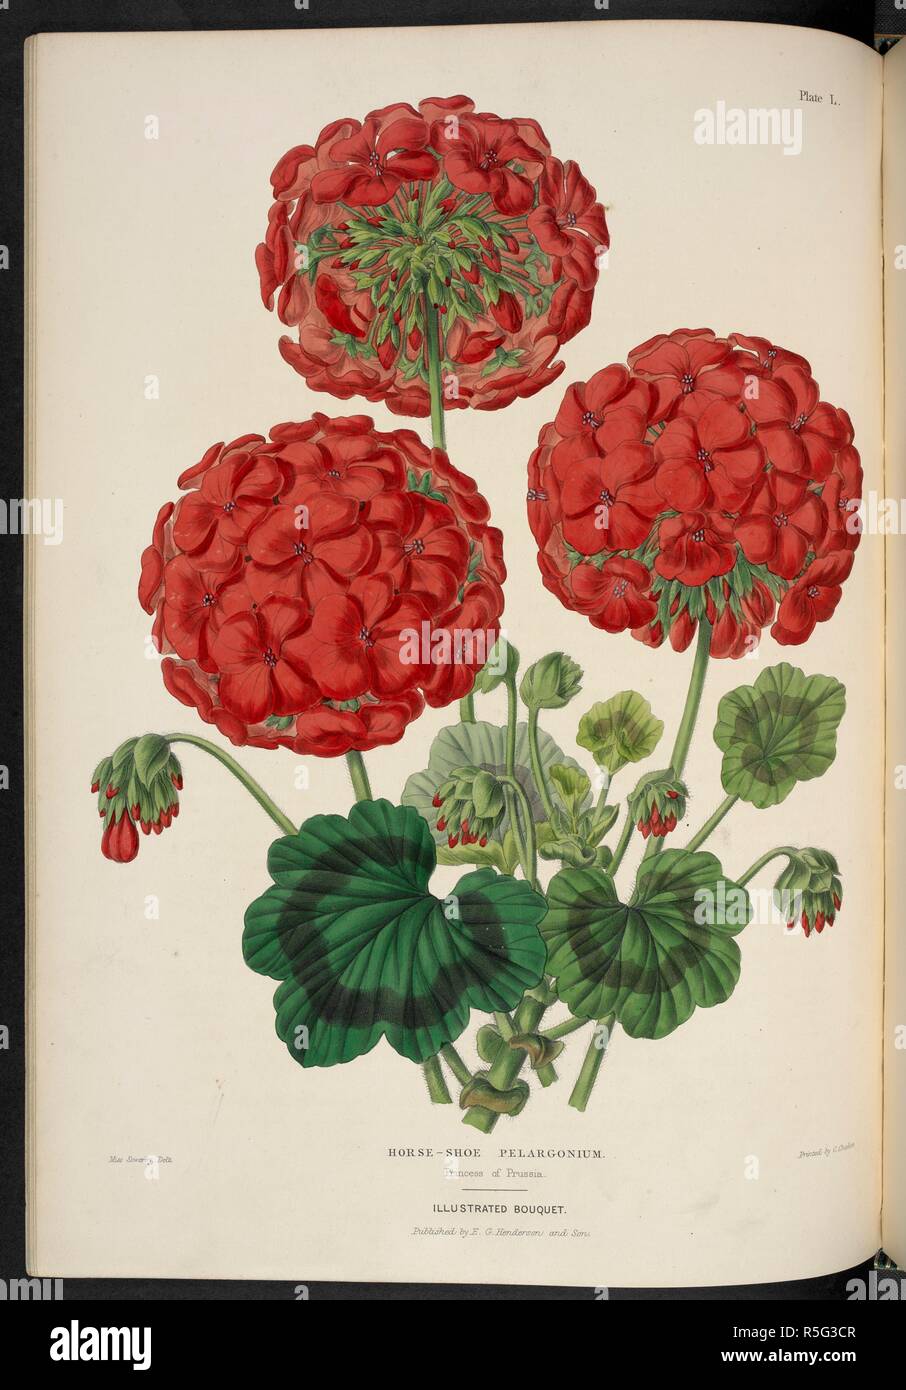 Pelargonium zonale: Princess of Prussia. Horse-shoe pelargonium. Princess of Prussia. The Illustrated Bouquet, consisting of figures, with descriptions of new flowers. London, 1857-64. Source: 1823.c.13 plate 50. Author: Henderson, Edward George. Sowerby, Miss. Stock Photo